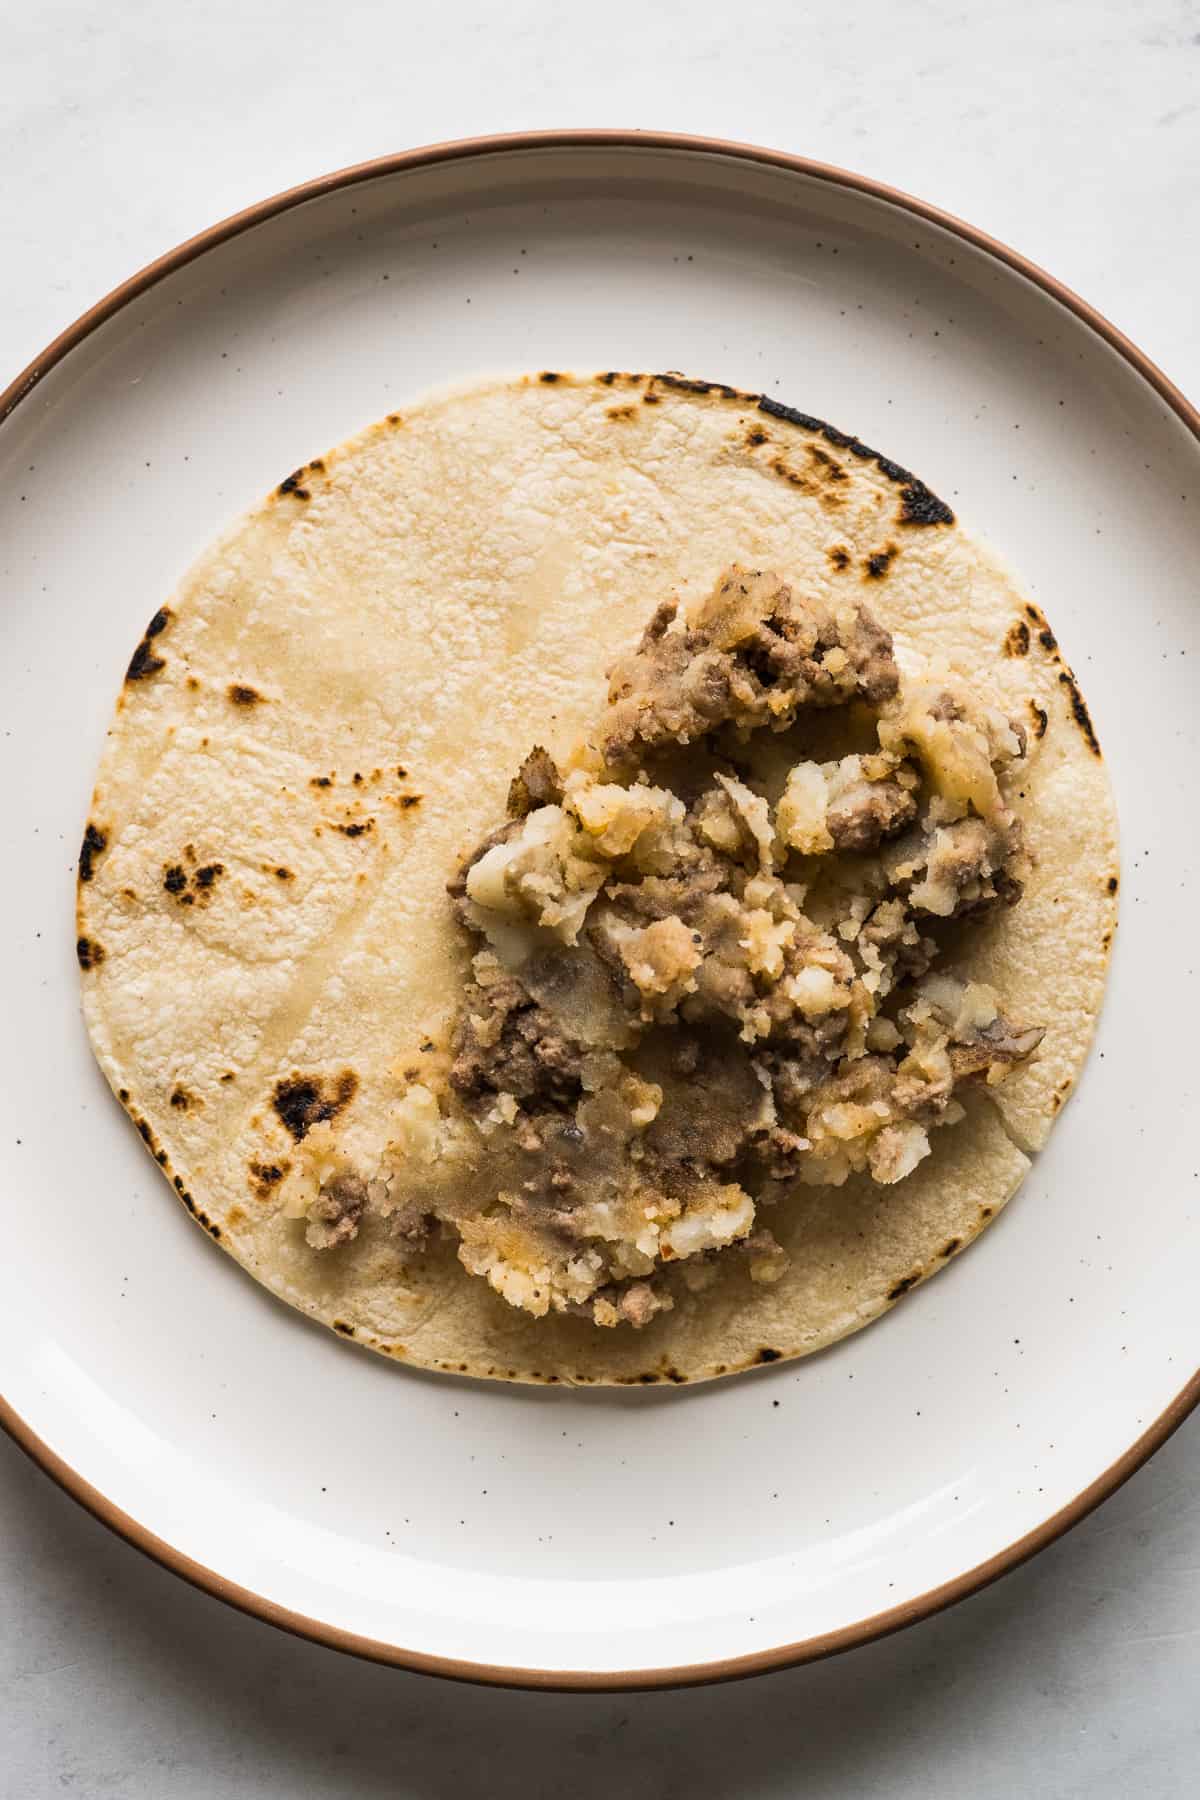 A corn tortilla with a filling of mashed potatoes and ground beef.